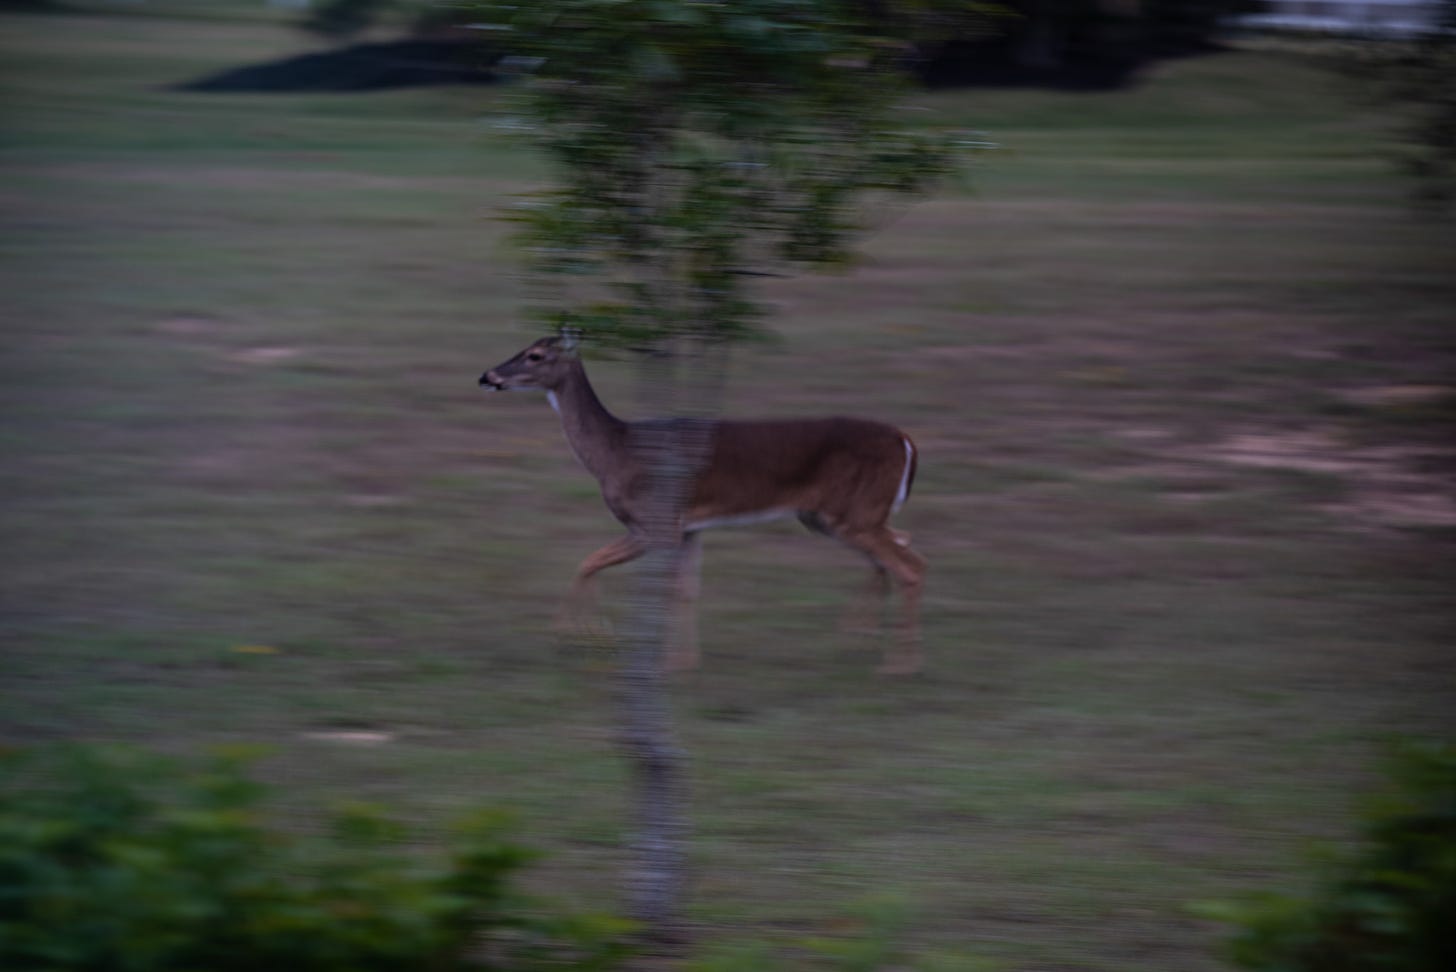  a white-tailed deer runnin, slightly blurred with a tree in the background